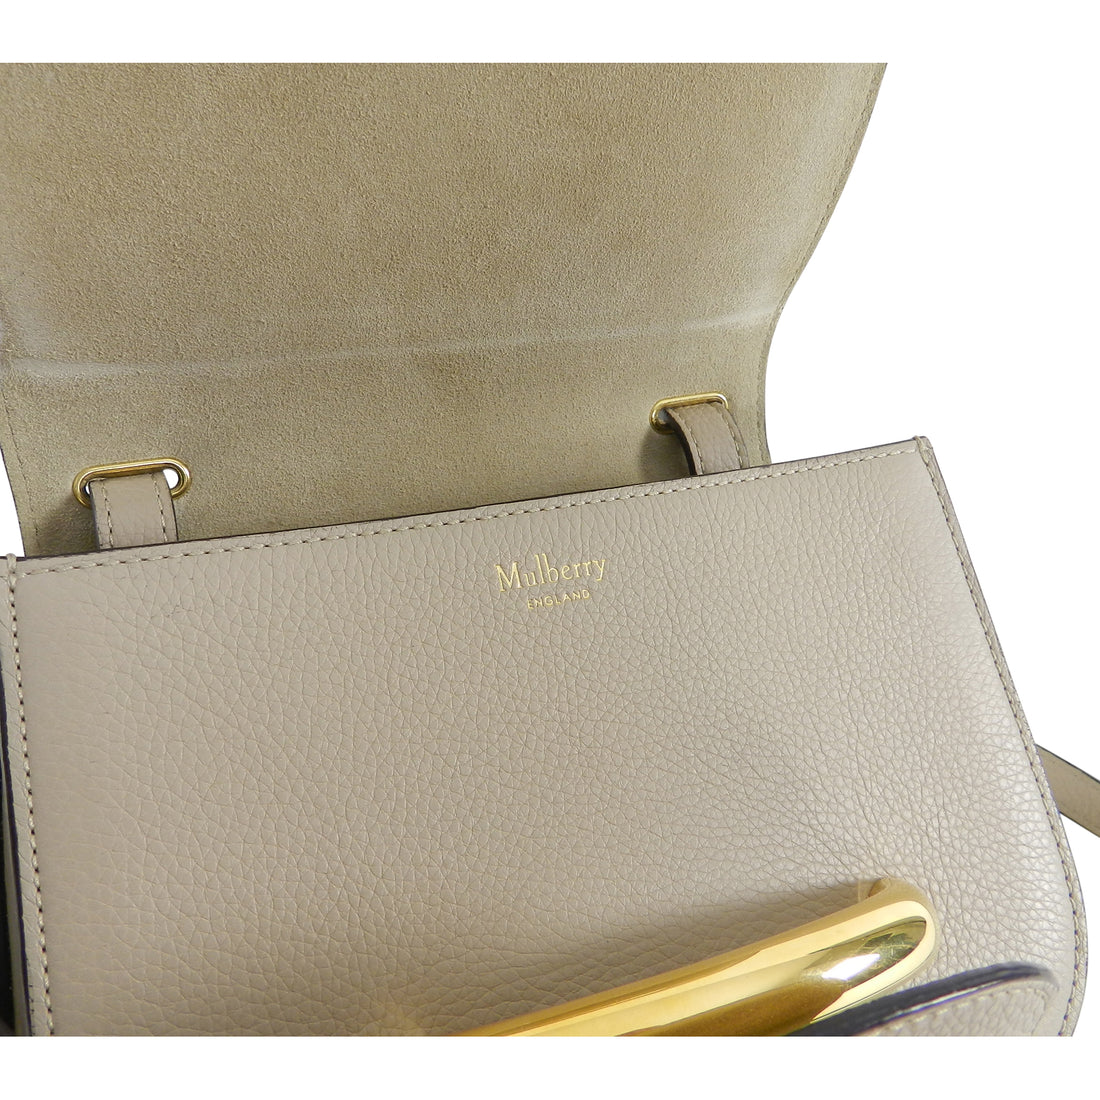 Mulberry Small Light Taupe Selwood Bag with Gold Bar